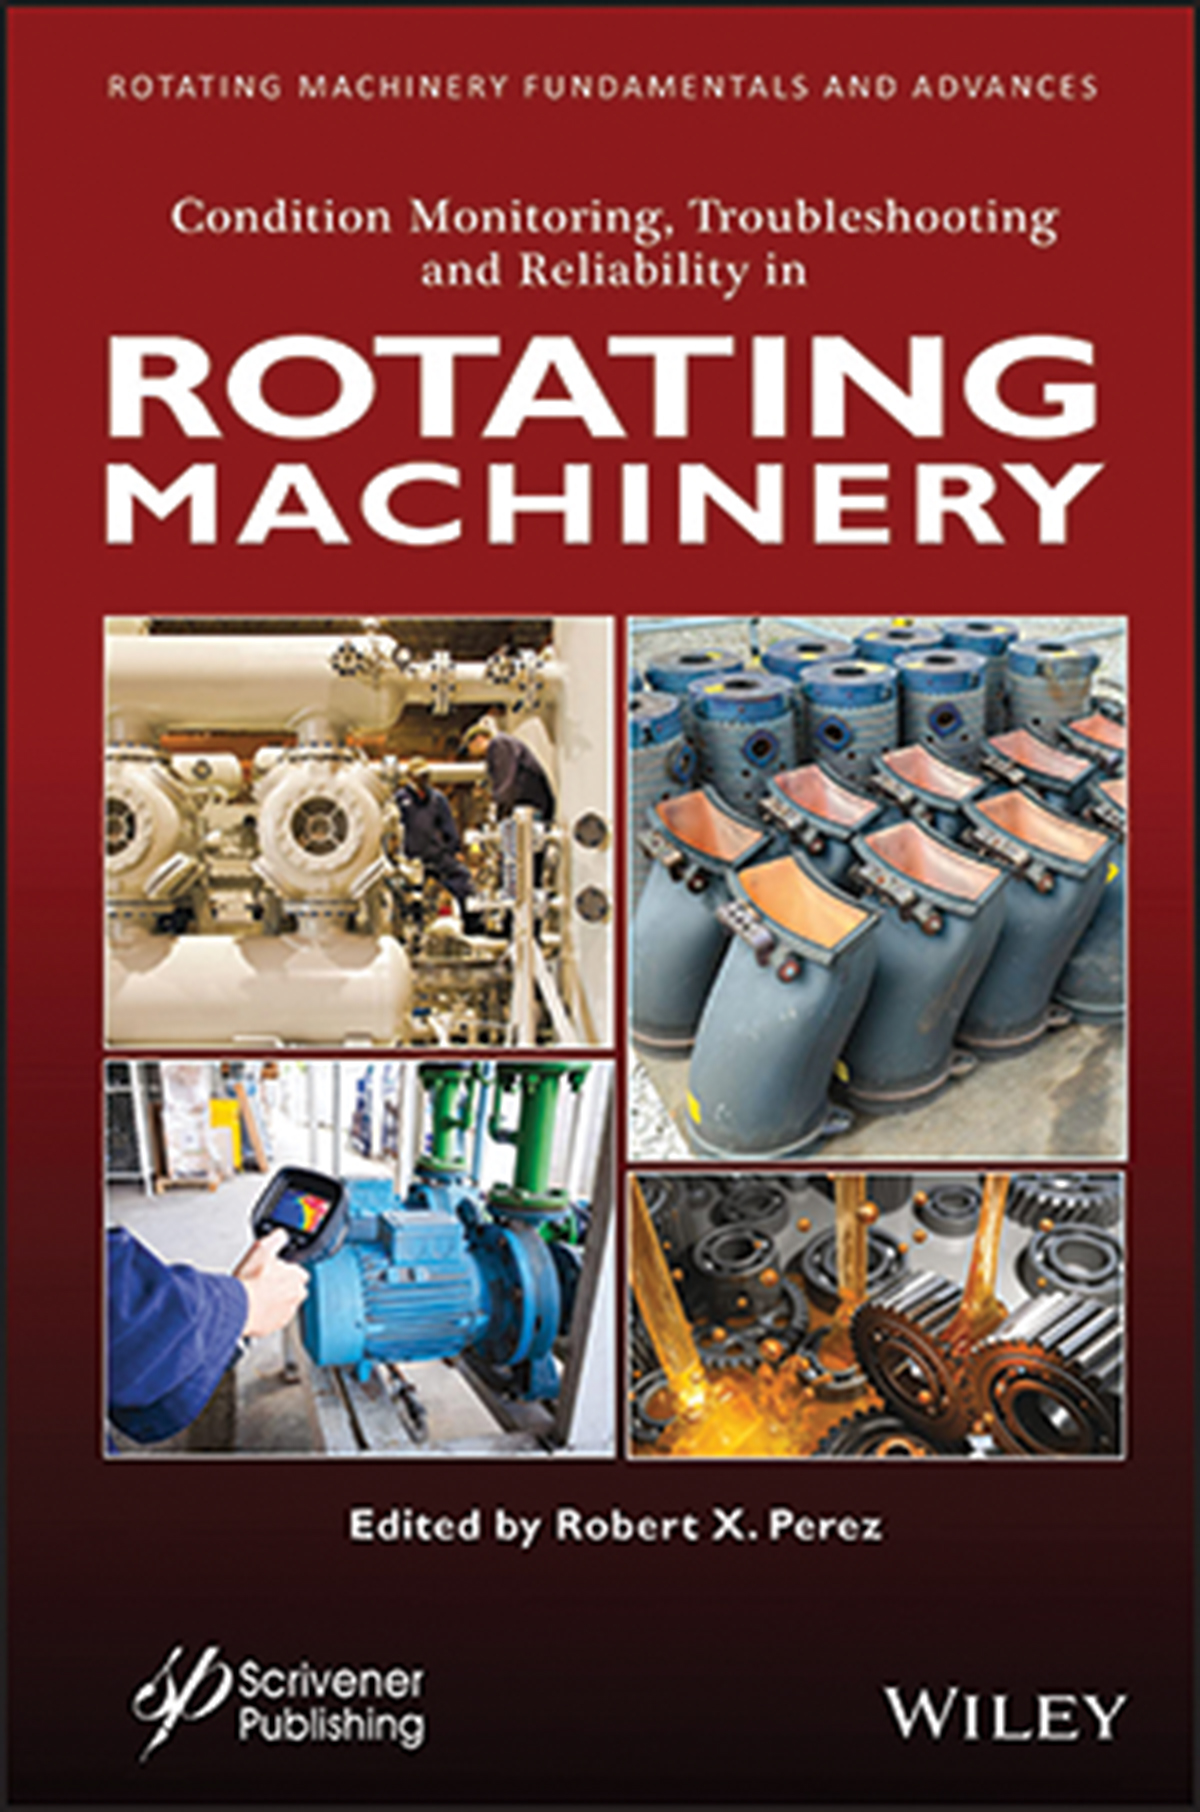 Condition Monitoring, Troubleshooting, and Reliability in Rotating Machinery